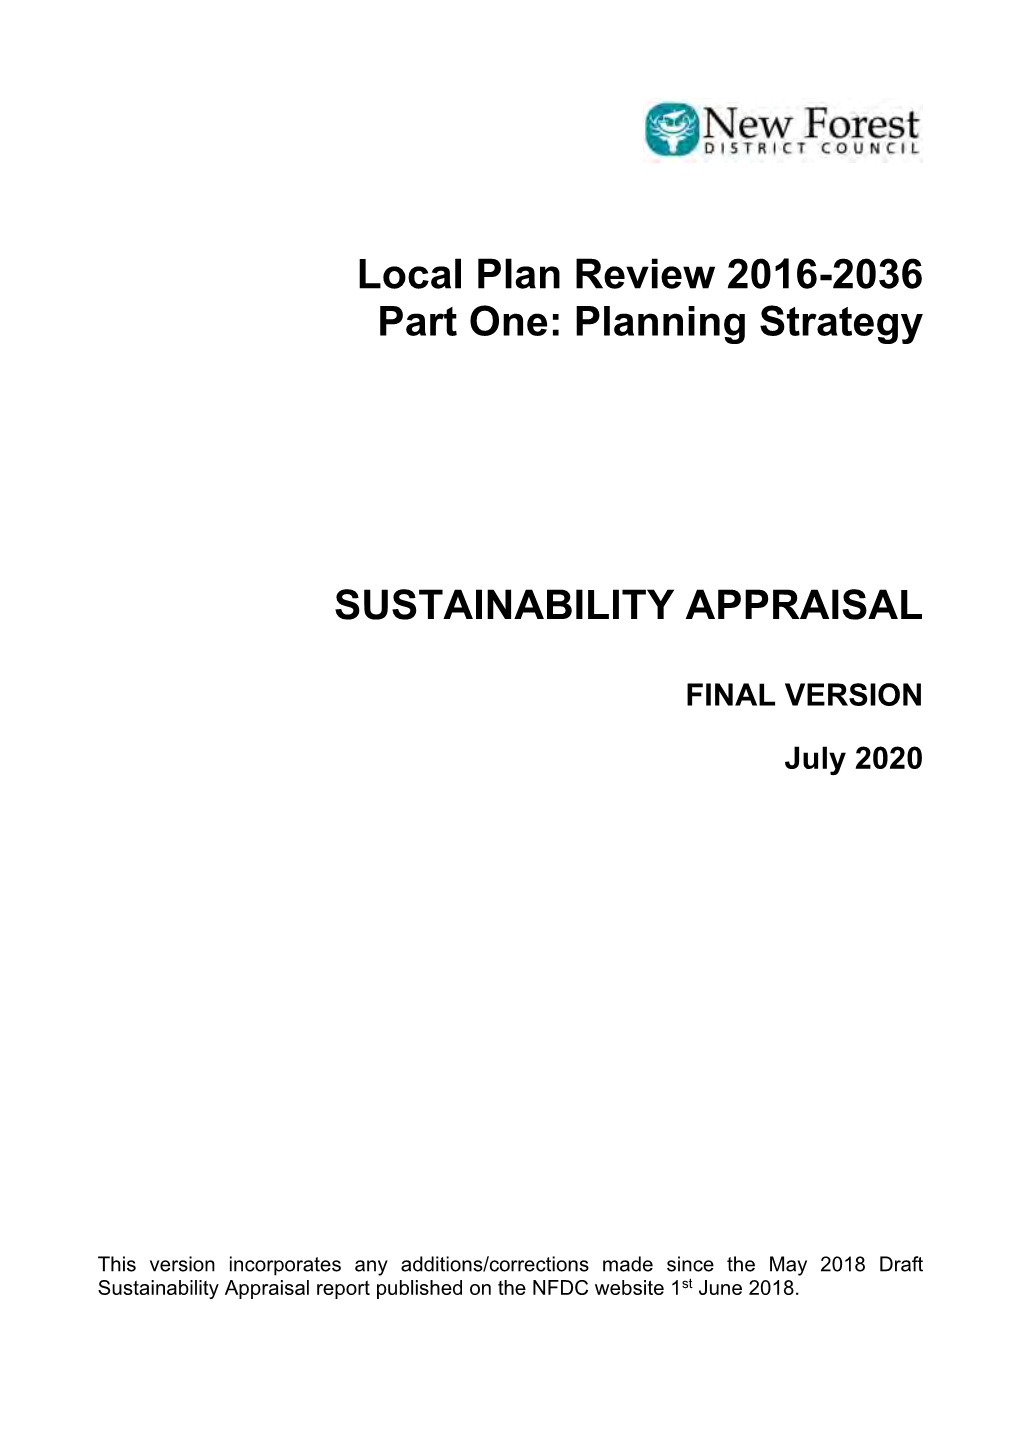 Planning Strategy SUSTAINABILITY APPRAISAL